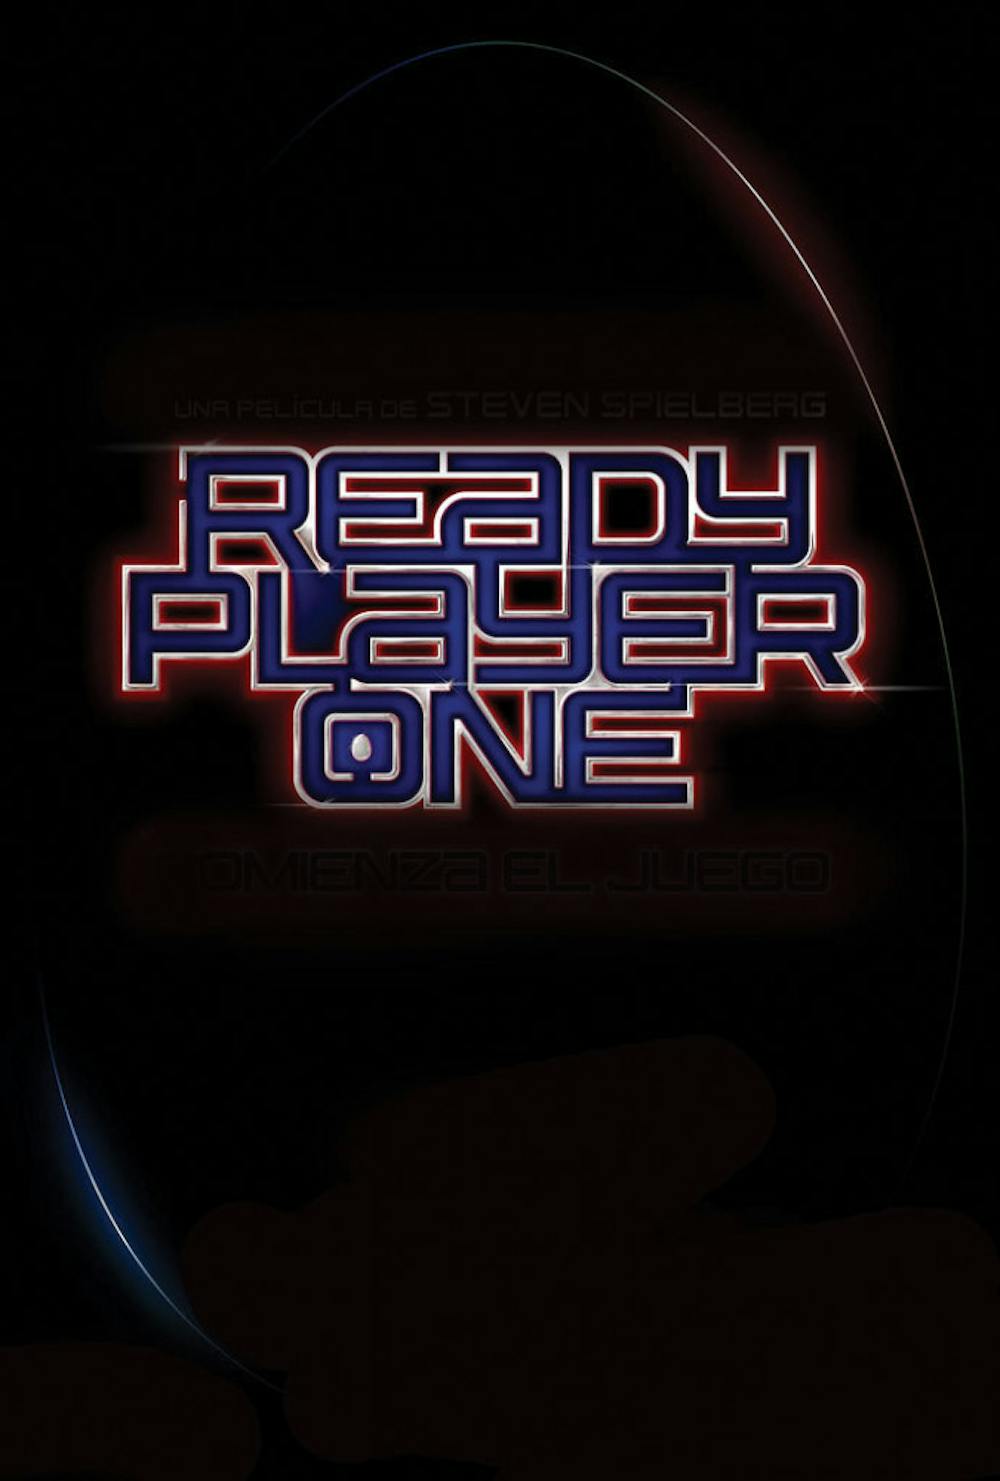 Ready Player One is based on the book of the same name. 